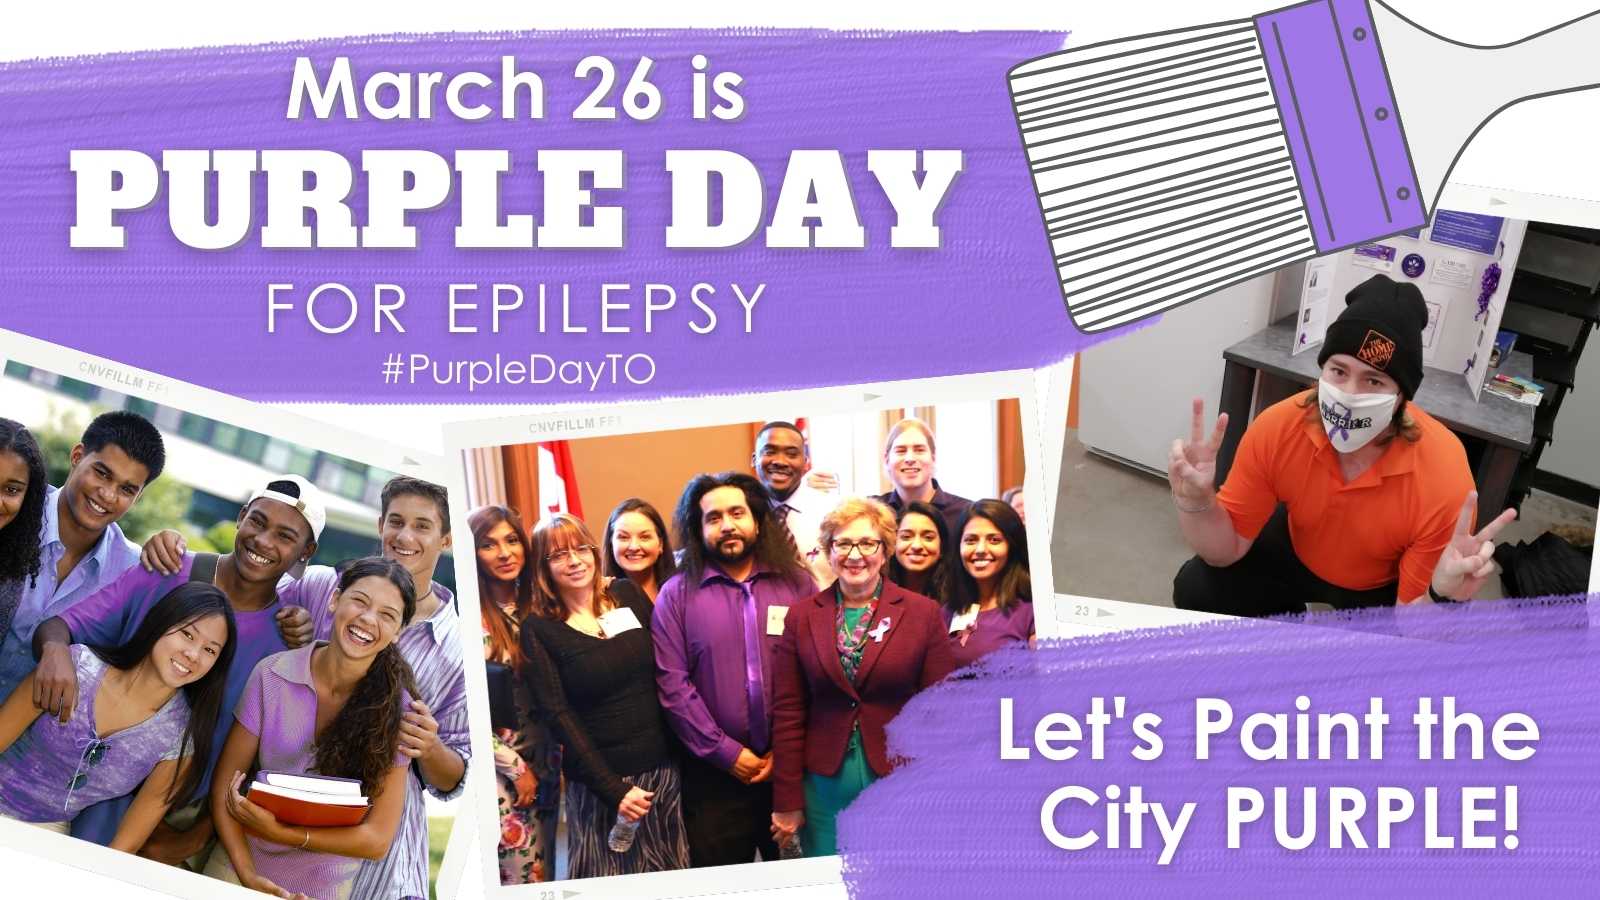 Purple paint strokes with title March 26 is Purple Day for Epilepsy, 3 images of people on Purple Day